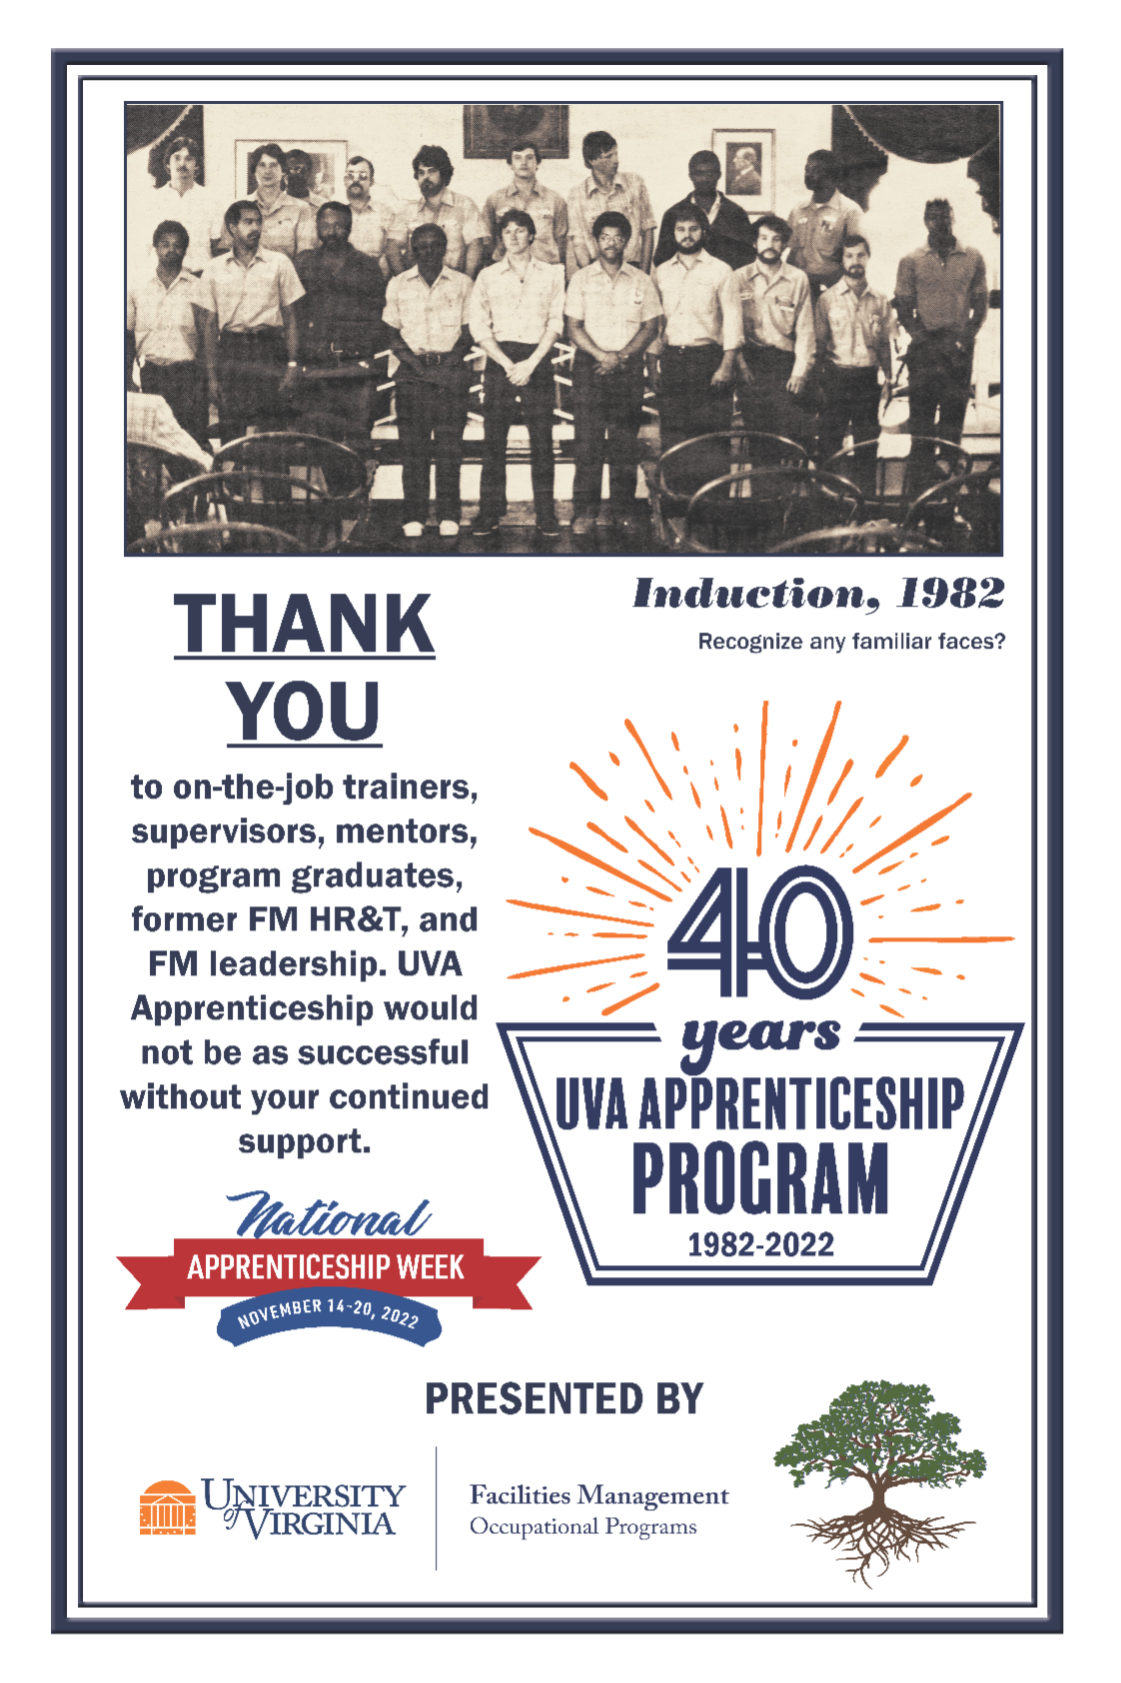 Flyer for the Apprenticeship Program's 40th anniversary, featuring a photo of the original apprentices from 1982 and a thank you message: 'To on-th-job trainers, supervisors, mentors, program graduates, former FM HR&T, and FM leadership. UVA Apprenticeship would not be as successful without your continued support. Presented by FM Occupational Programs.